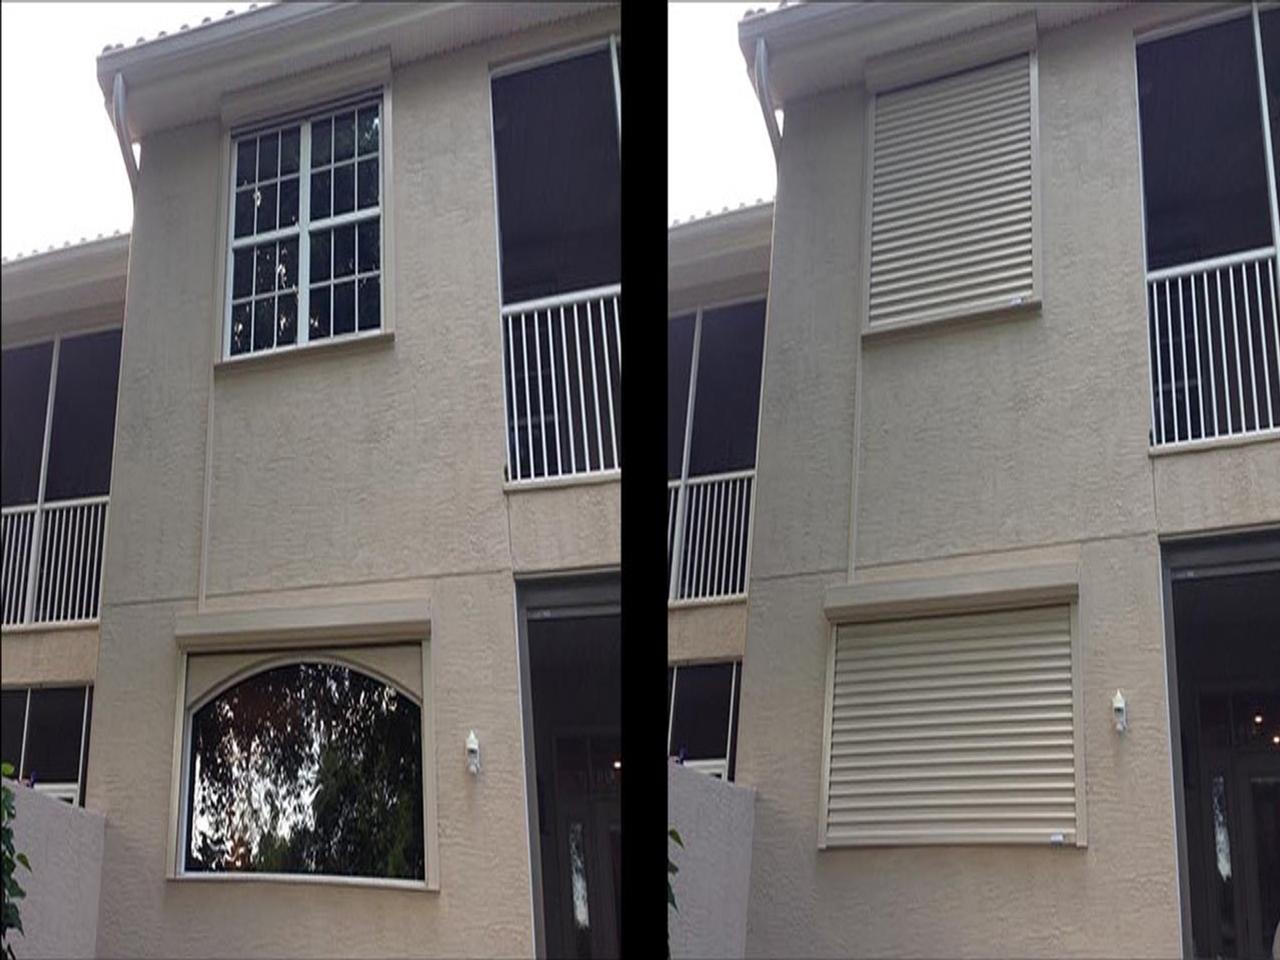 View of hurricane shutters raised and lower on the same home